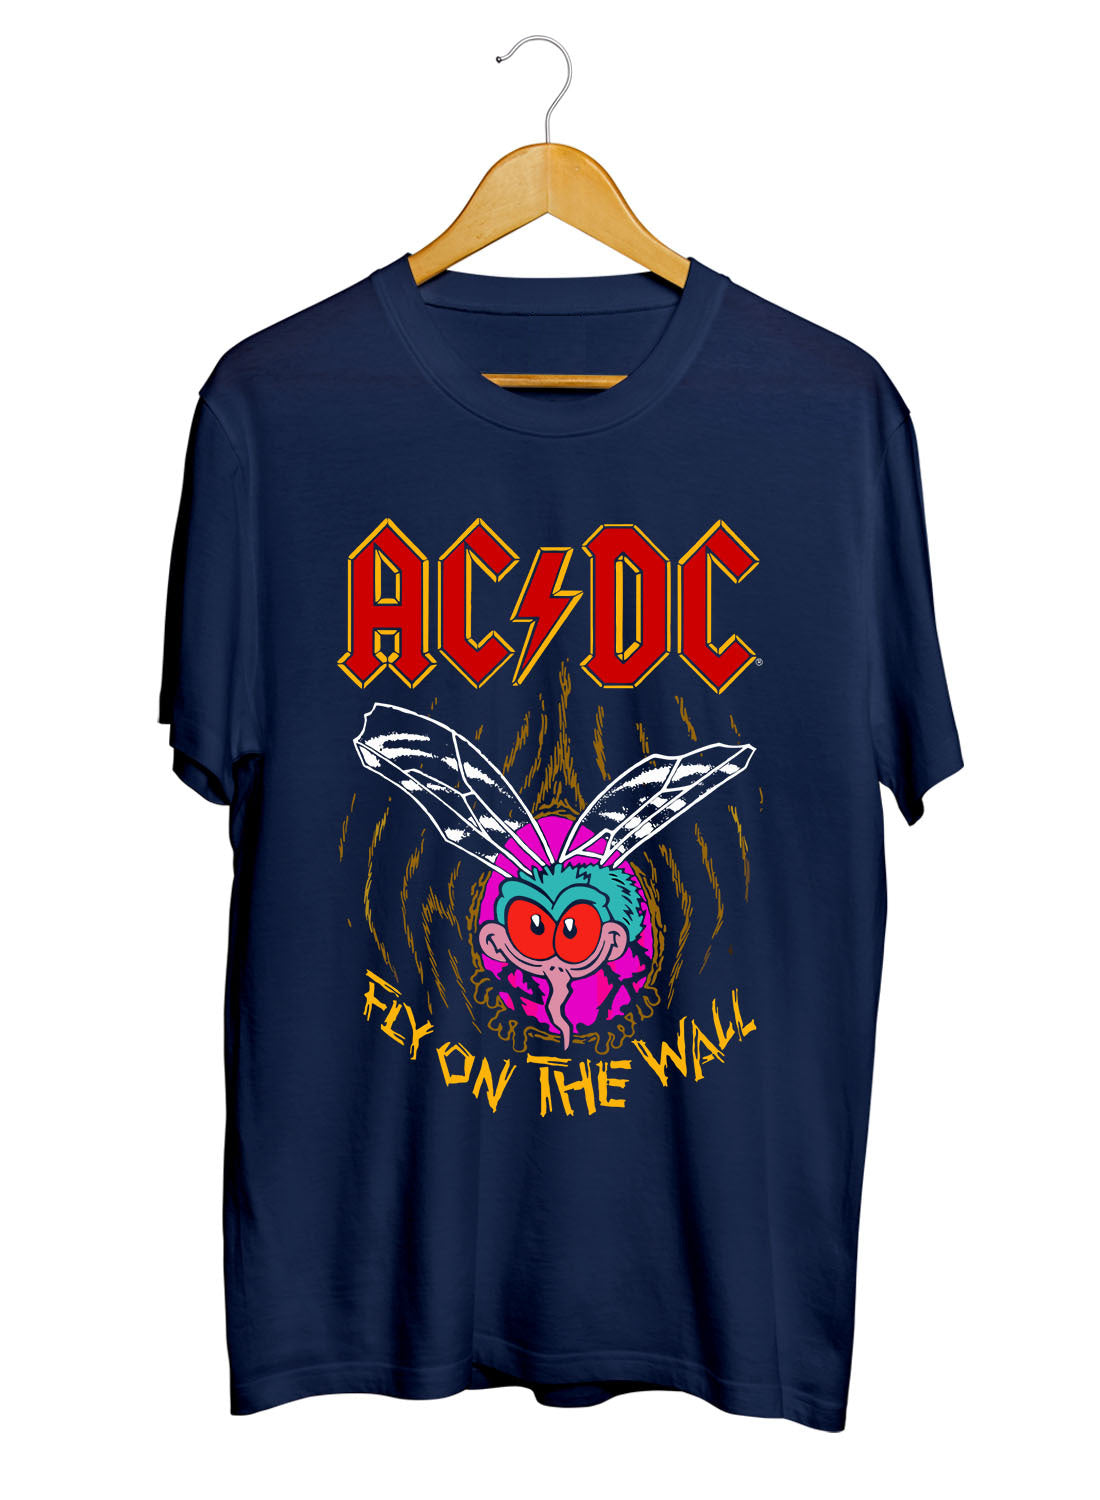 ACDC Fly Music Printed Unisex 100% Cotton Tshirt